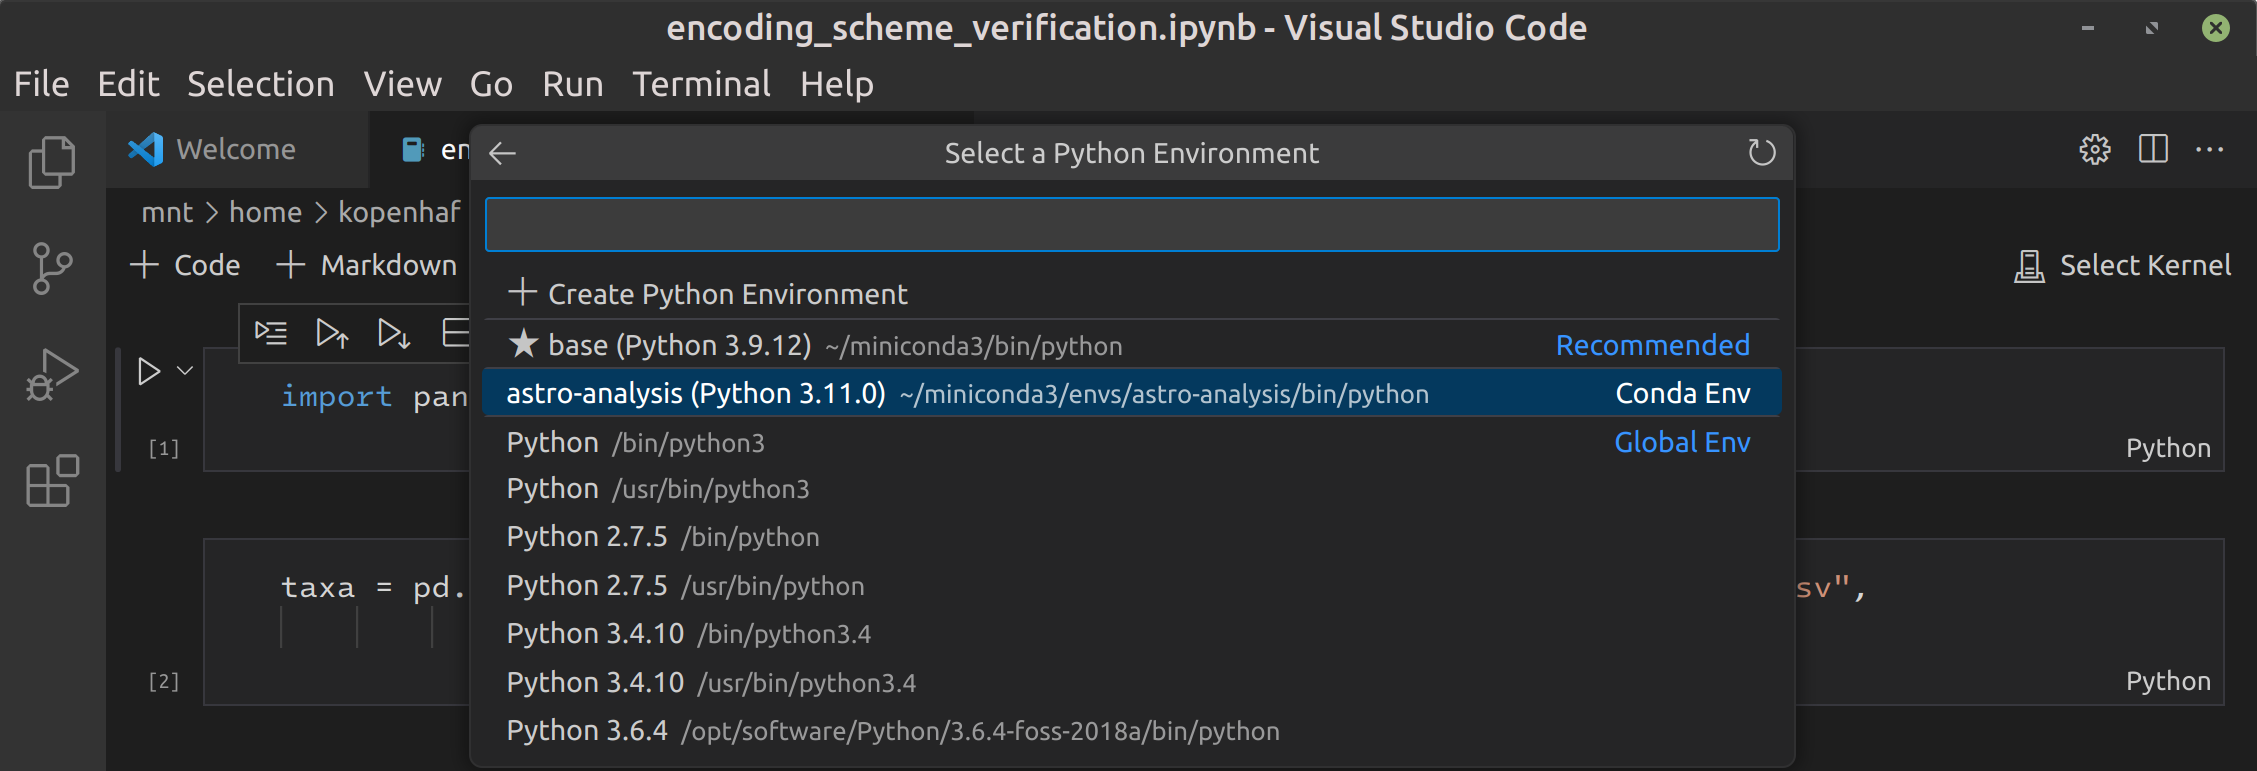 Screenshot of the VS Code Kernel Selection menu with a long list of Python environments listed. Some are labeled on the right as "Recommended", "Conda Env", and "Global Env"